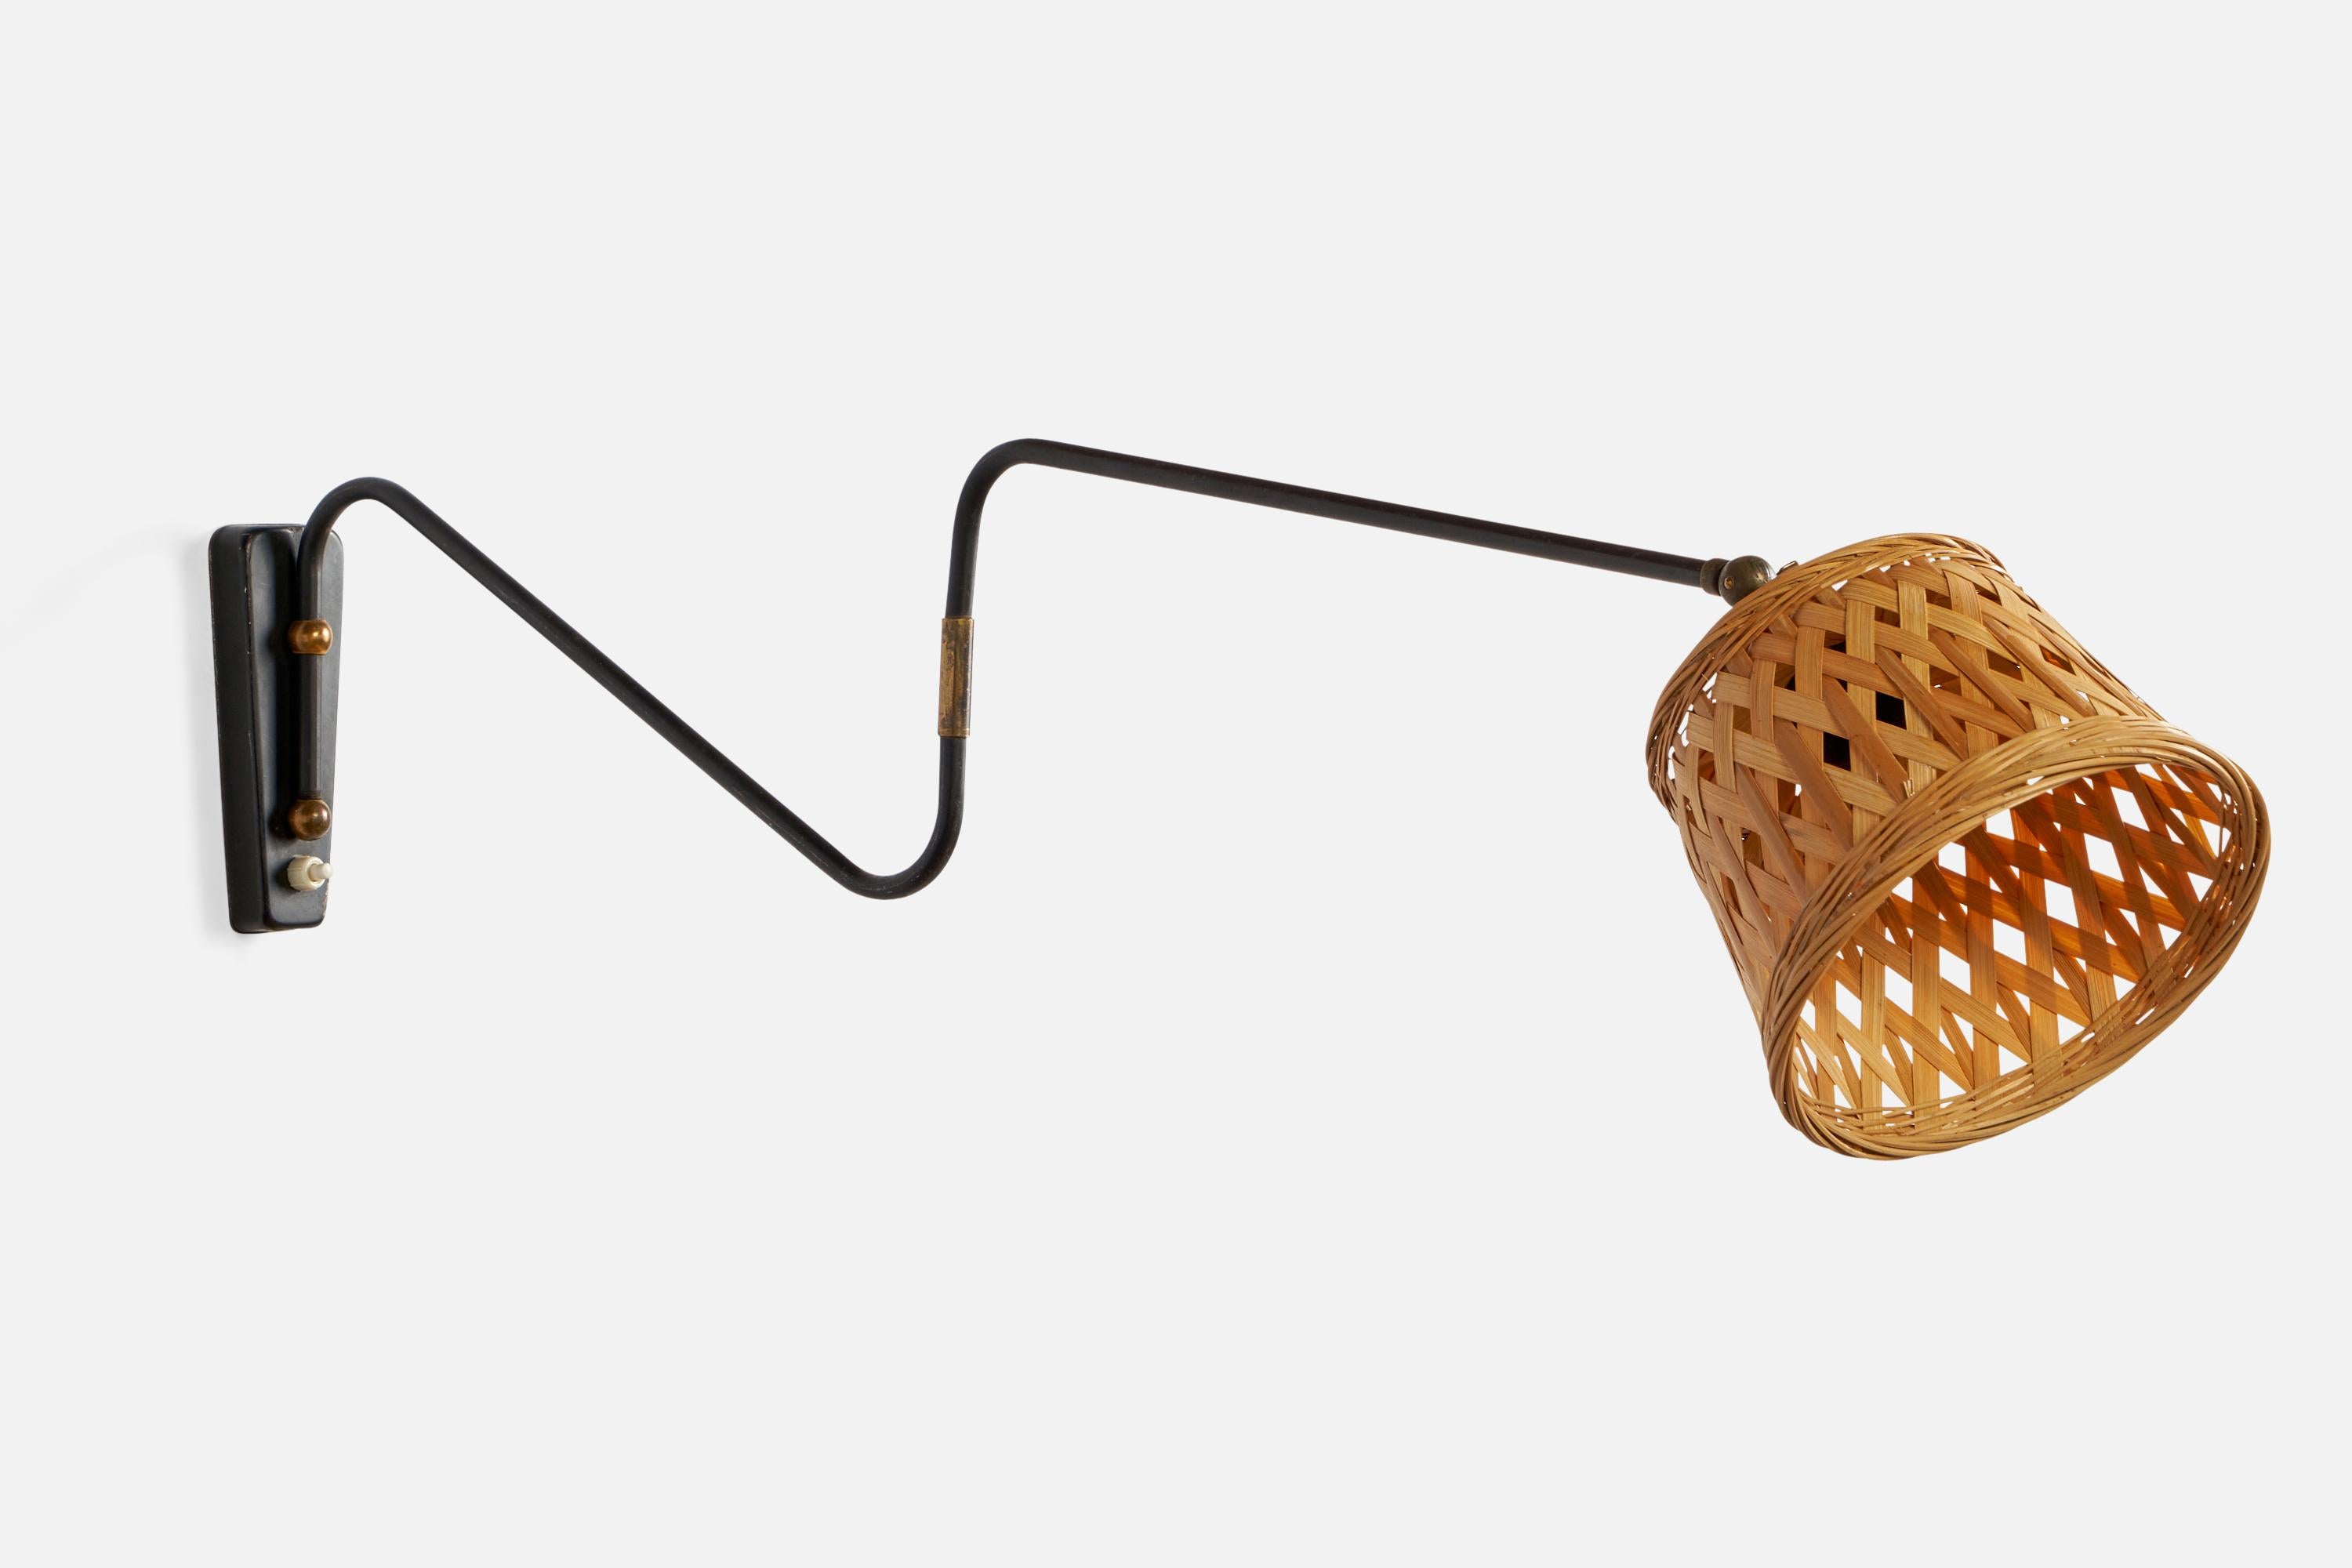 An adjustable brass, black-lacquered metal and rattan wall light designed and produced in Denmark, 1940s.

Overall Dimensions (inches): 5.75” H x 7.2” W x 33” D
Back Plate Dimensions (inches): 6” H x 2.15” W x 0.9” D
Bulb Specifications: E-26